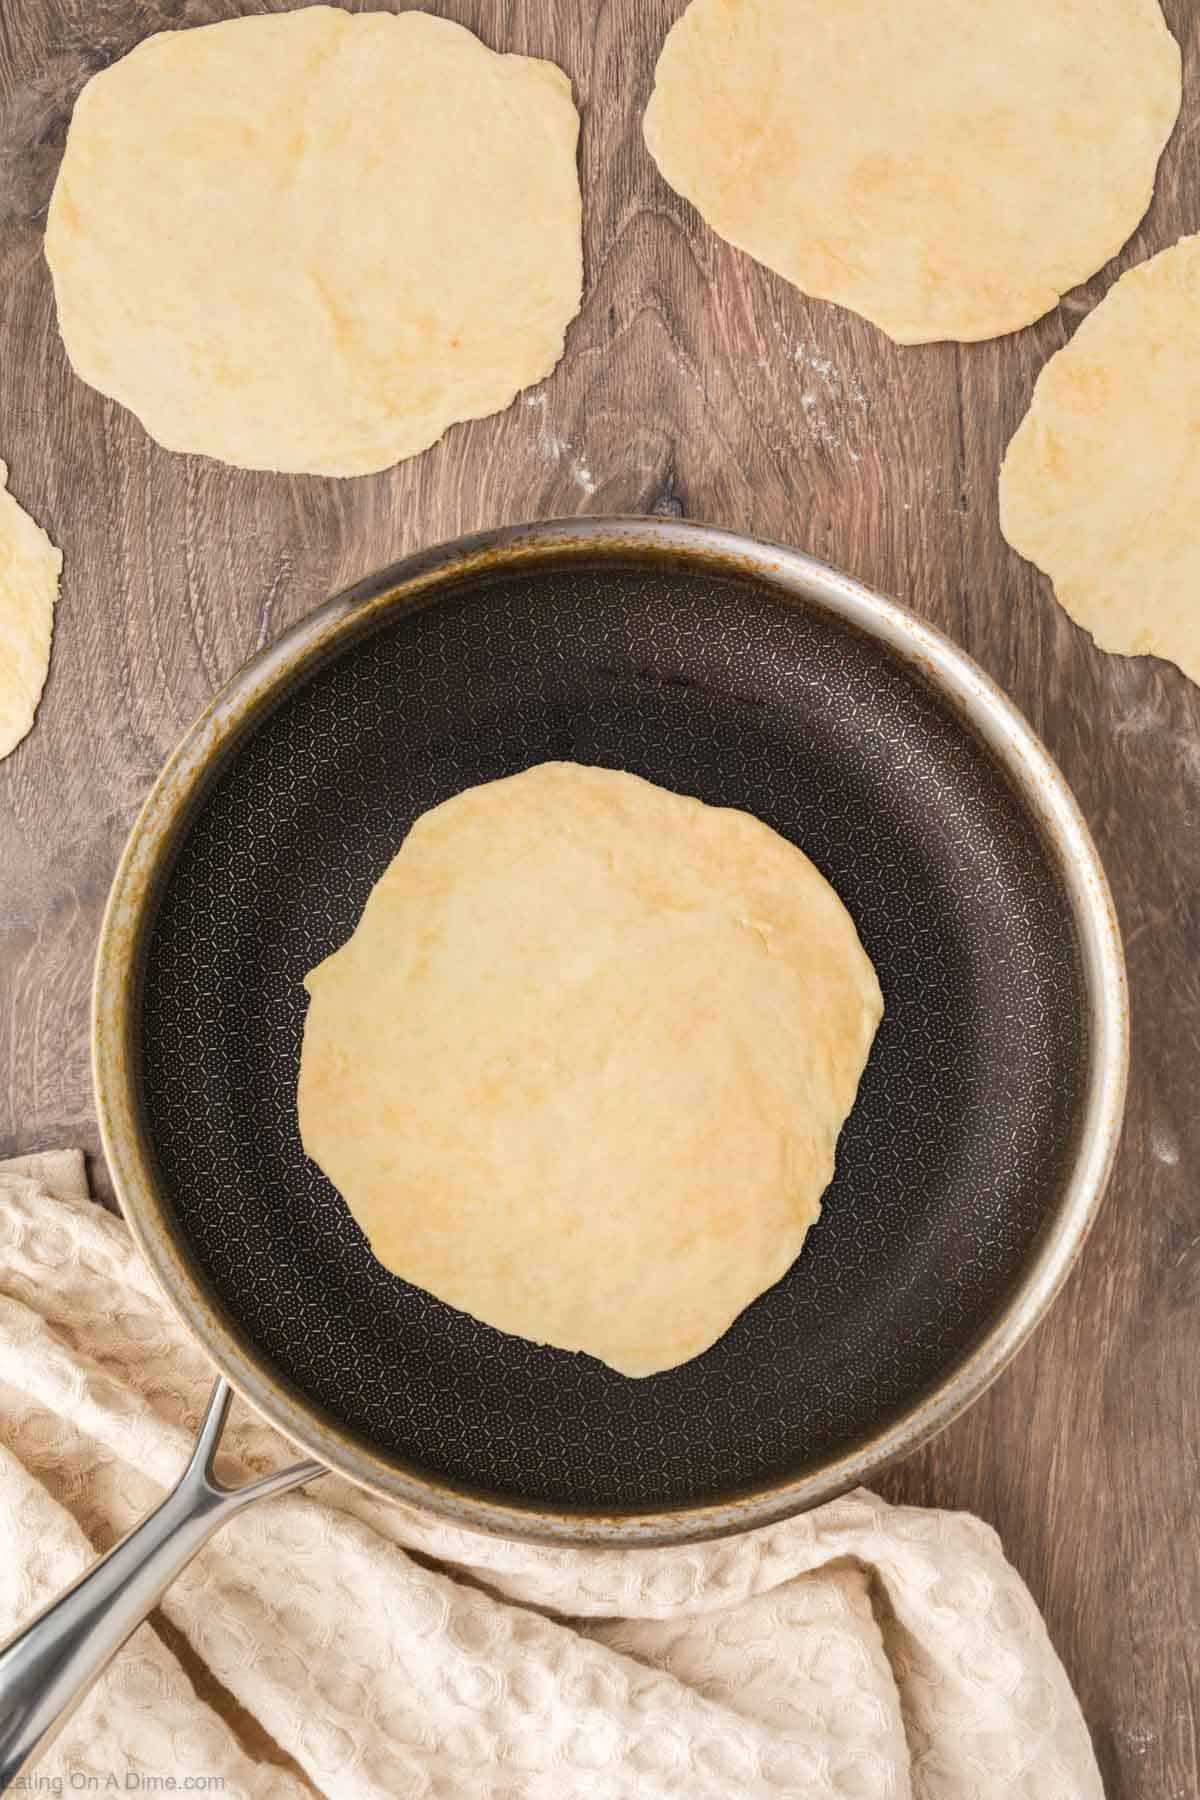 Placing the tortilla in a skillet 